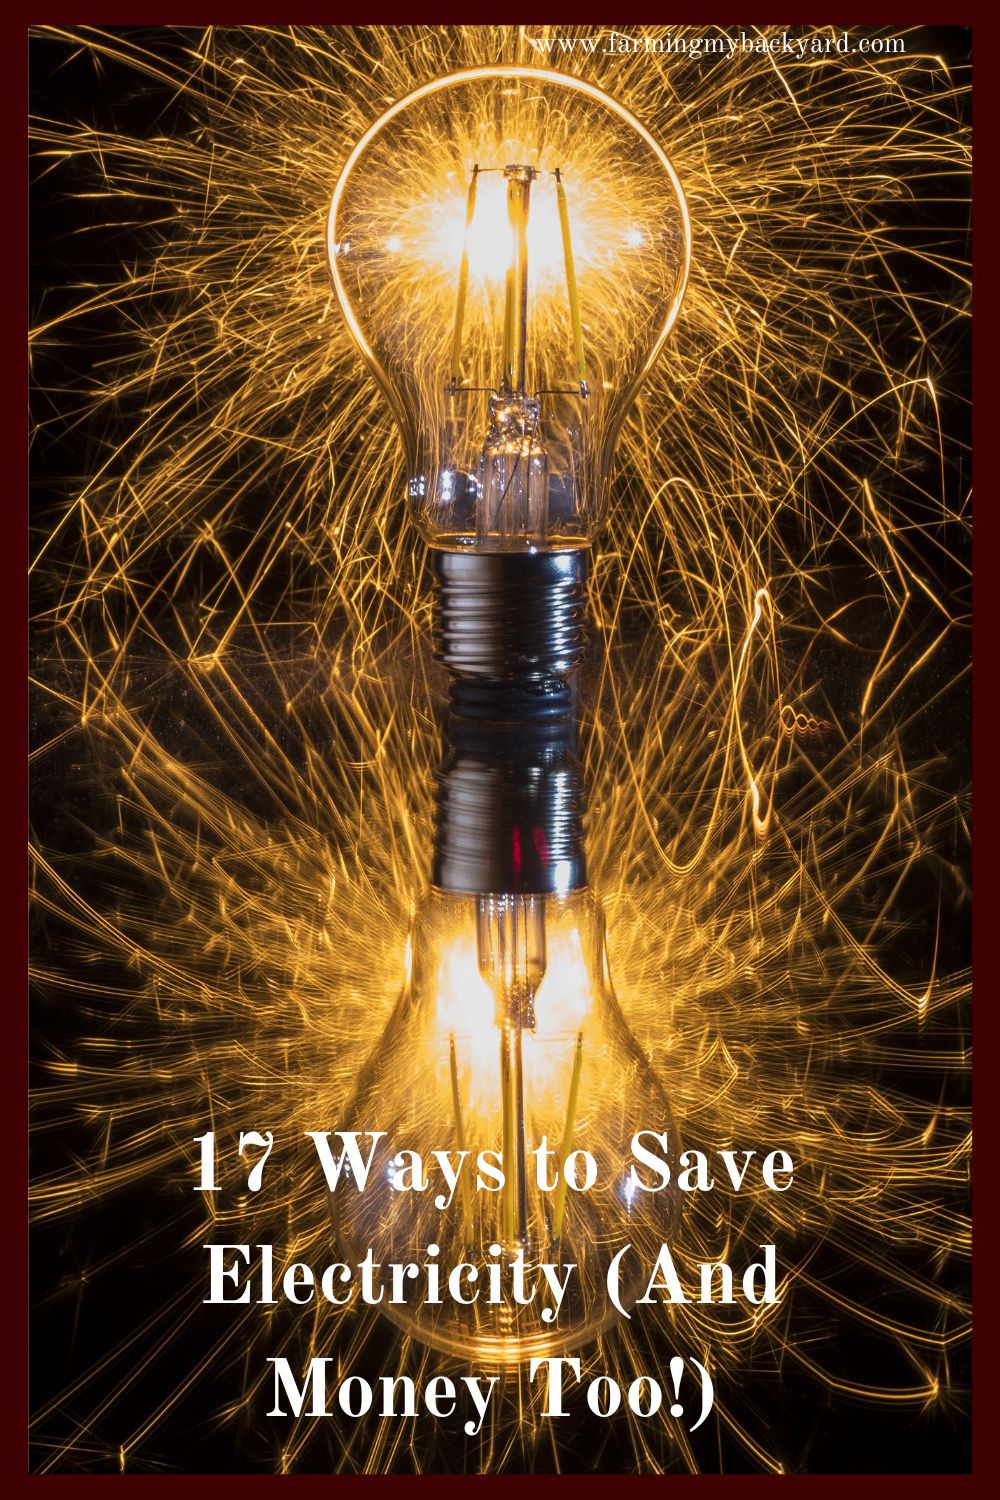 Need to save some money? Getting solar panels? Reducing your carbon footprint? Here are 17 ways to save electricity that you can do today.